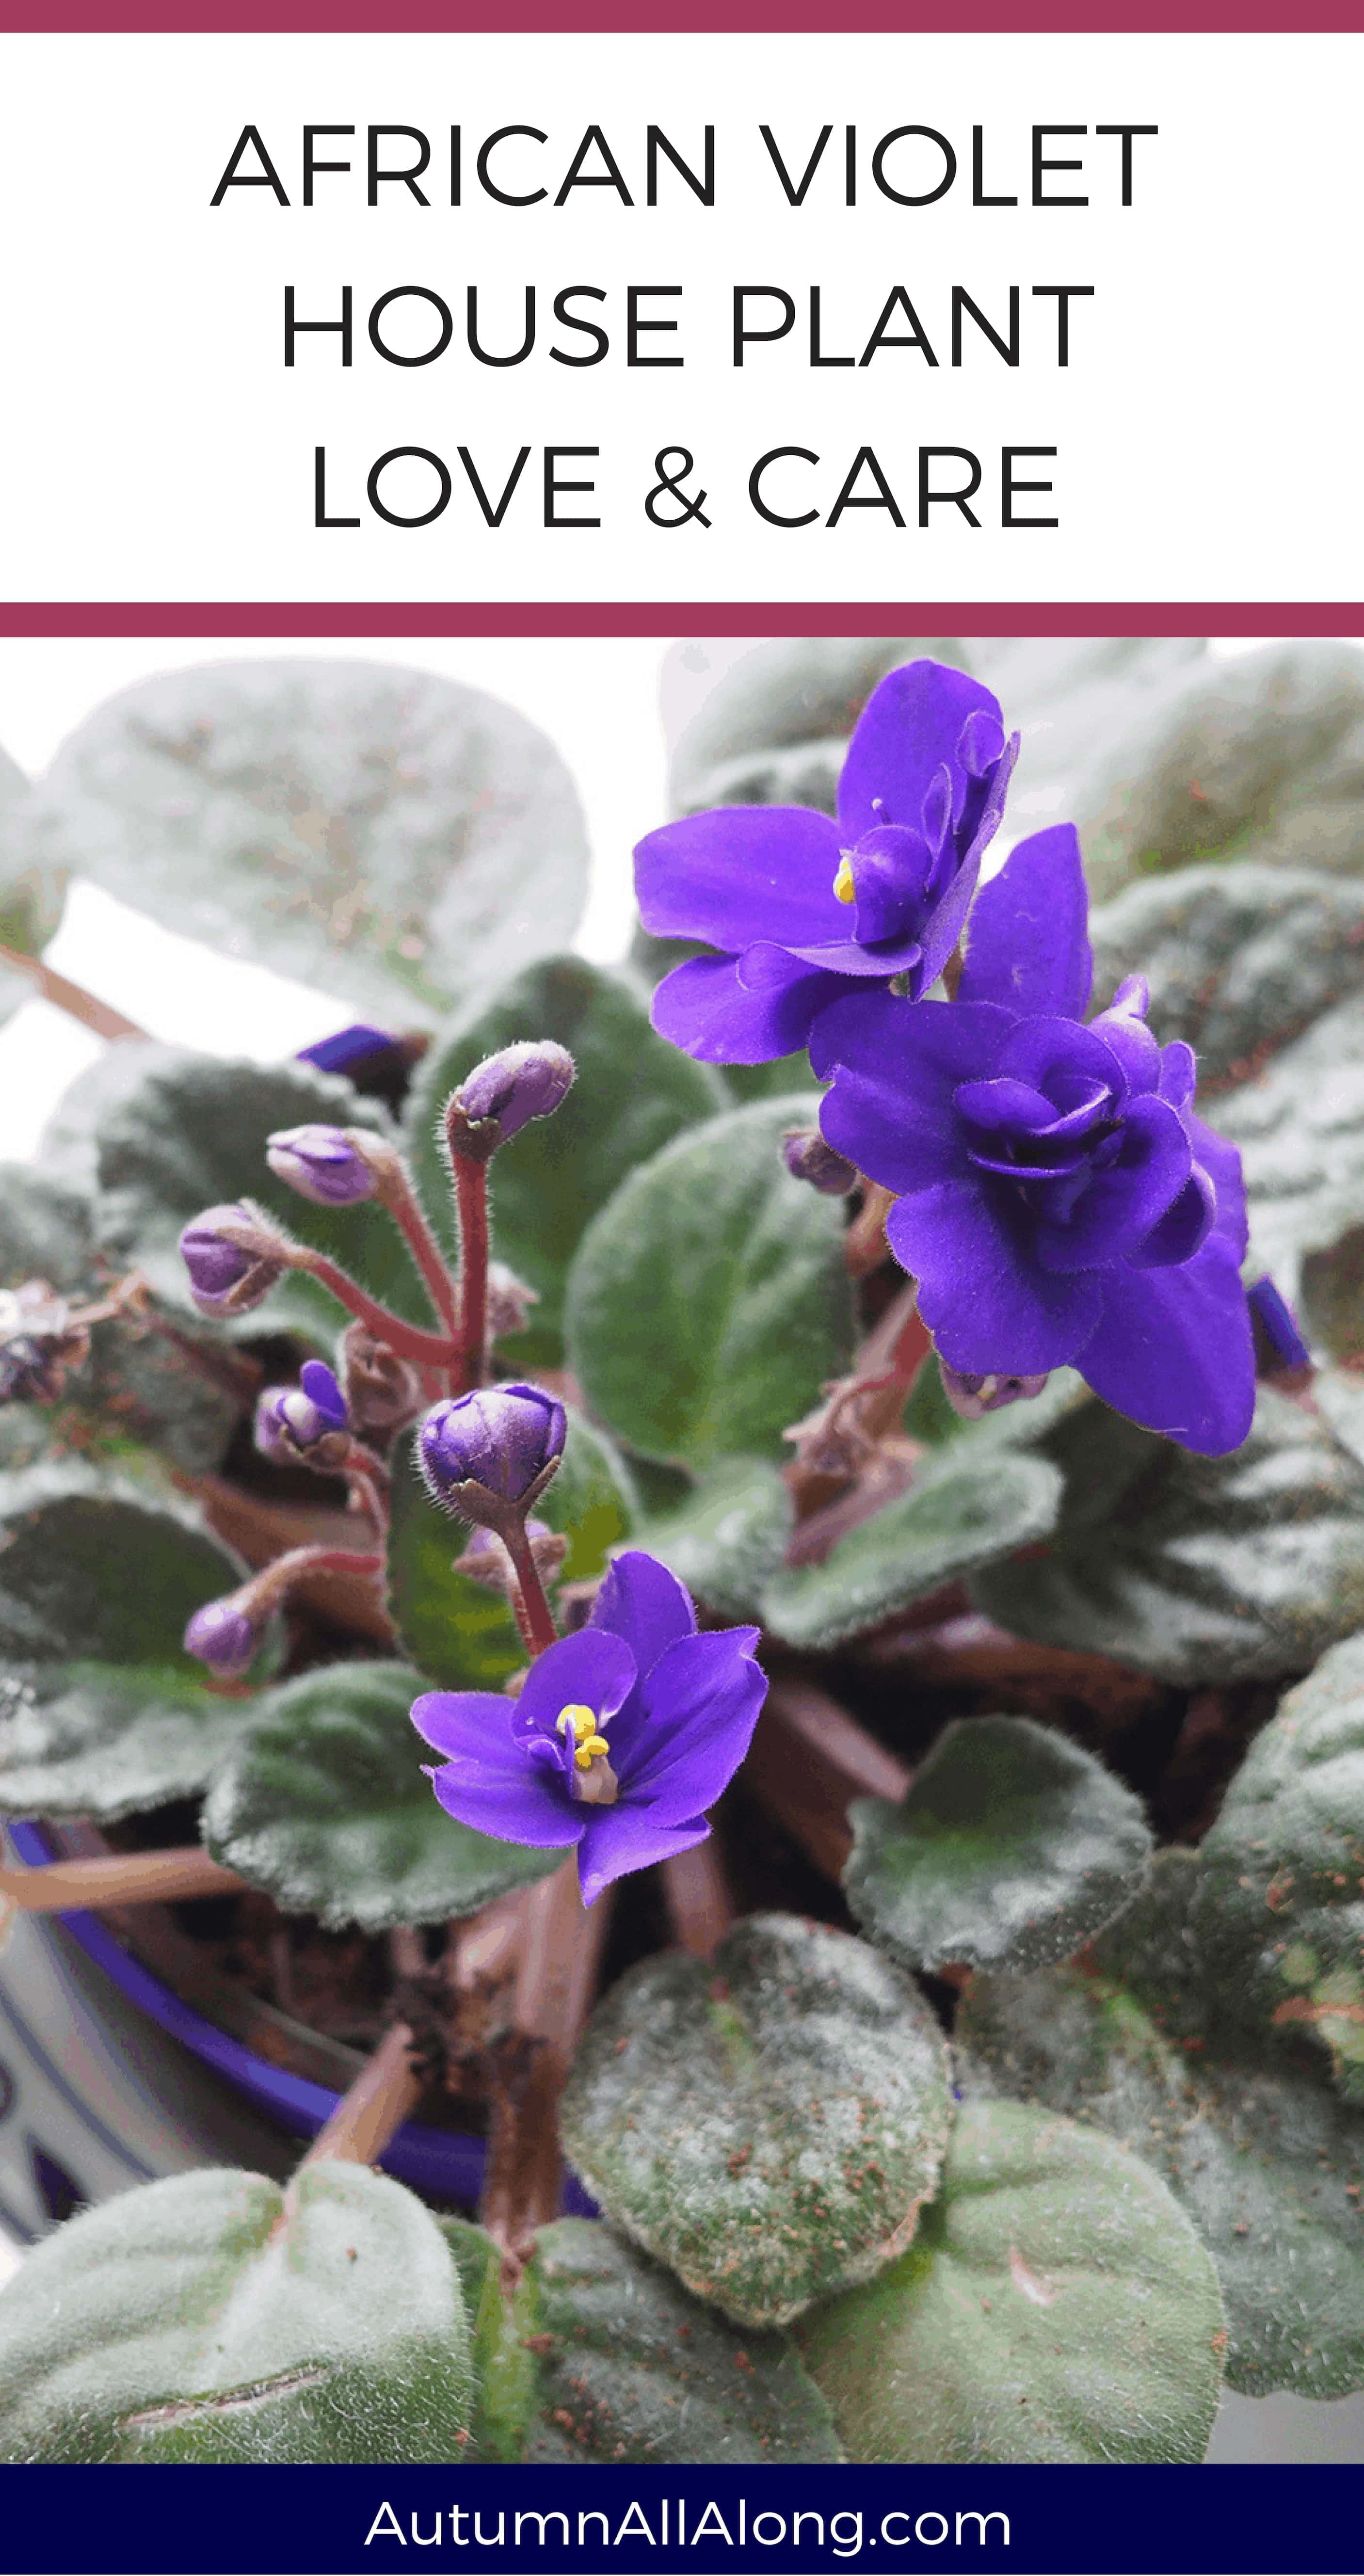 Explaining how to make your African Violets bloom weekly and keep your house plant looking gorgeous! | via Autumn All Along